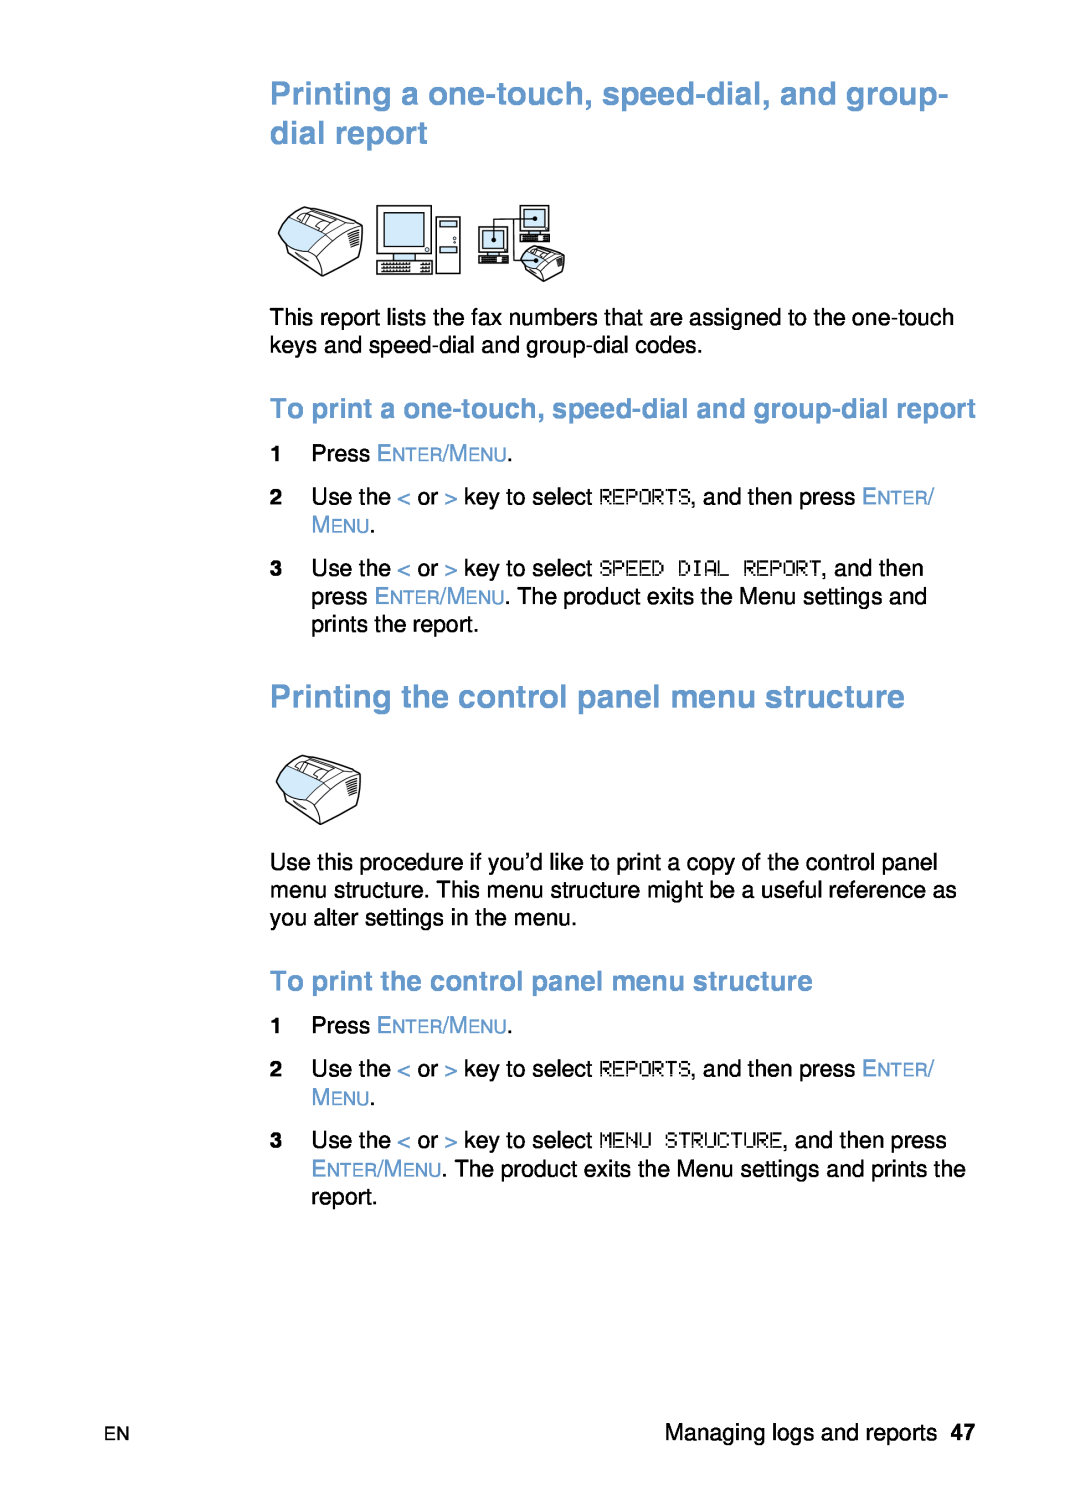 HP 3200 manual Printing a one-touch, speed-dial, and group- dial report, Printing the control panel menu structure 